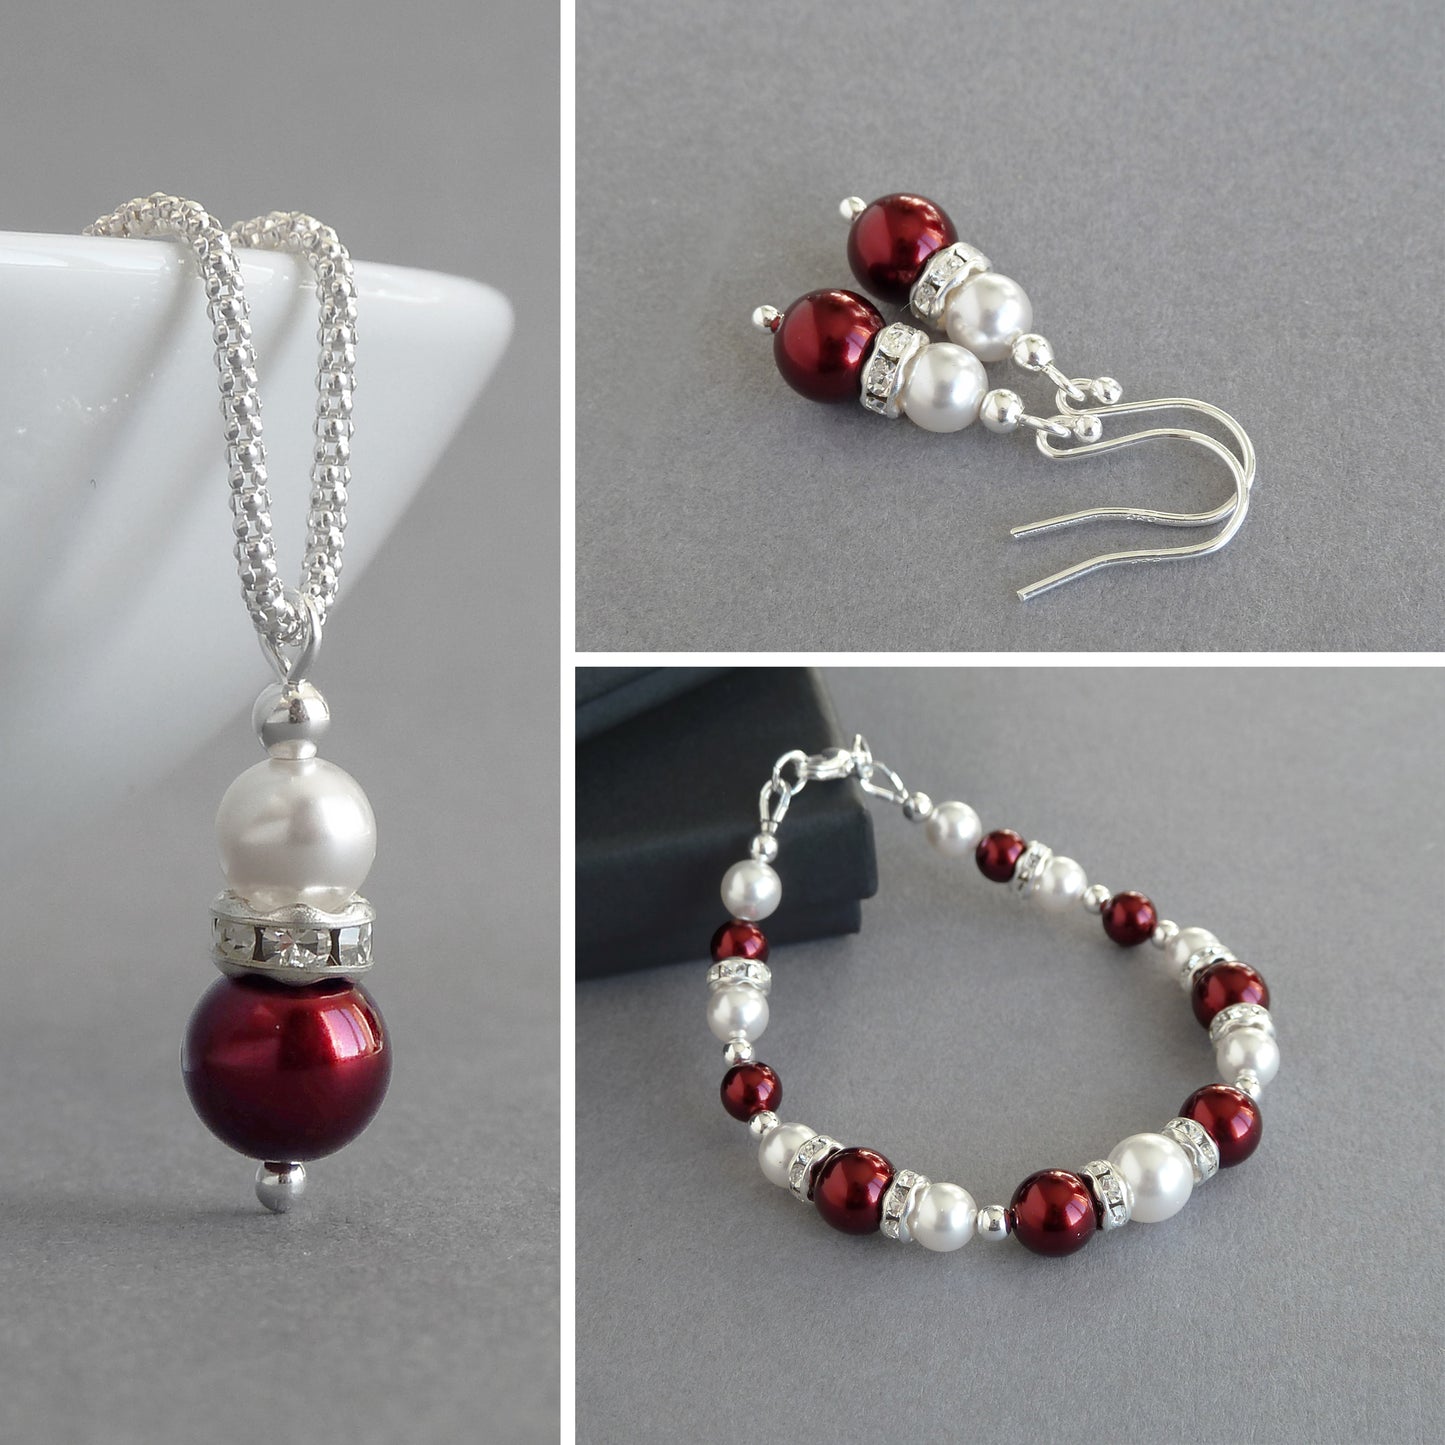 Burgundy pearl and crystal jewellery sets